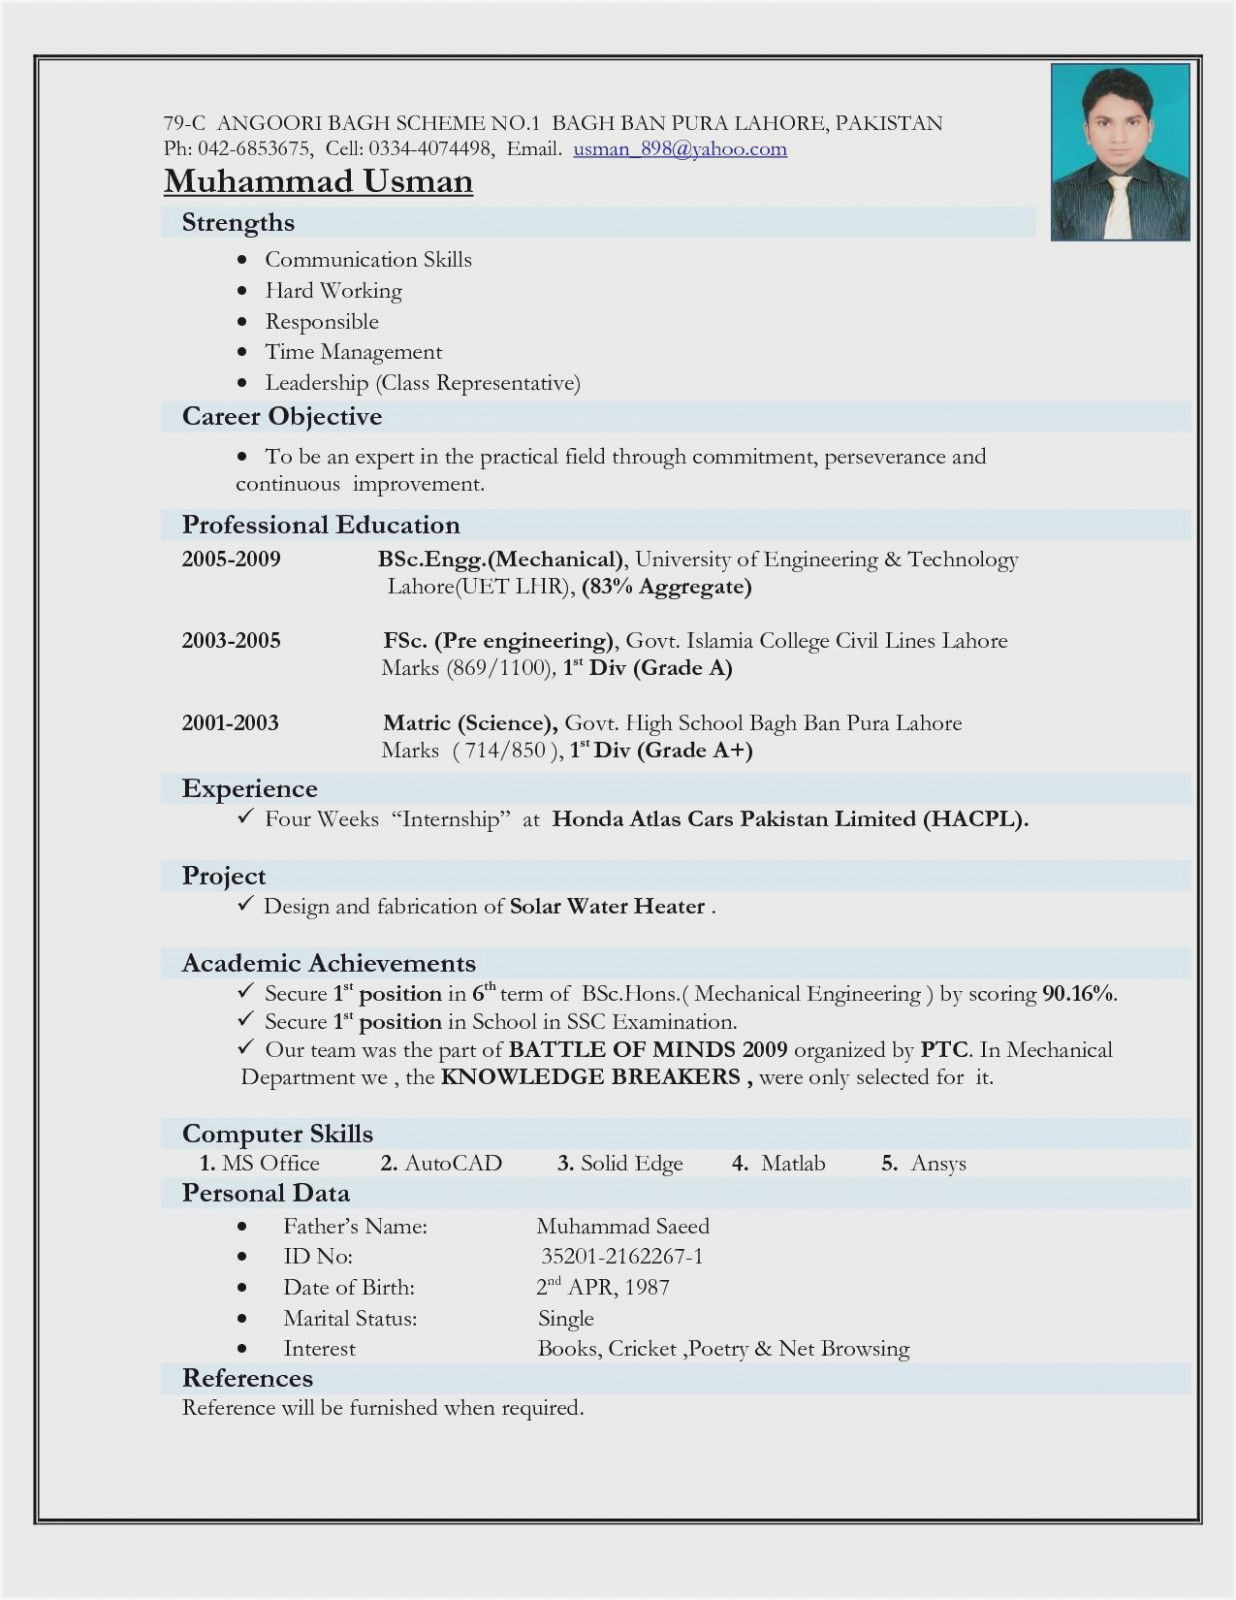 Sample Resume for Freshers Engineers Computer Science Download 12 Engineer Resume Template Doc Job Resume format, Resume format …